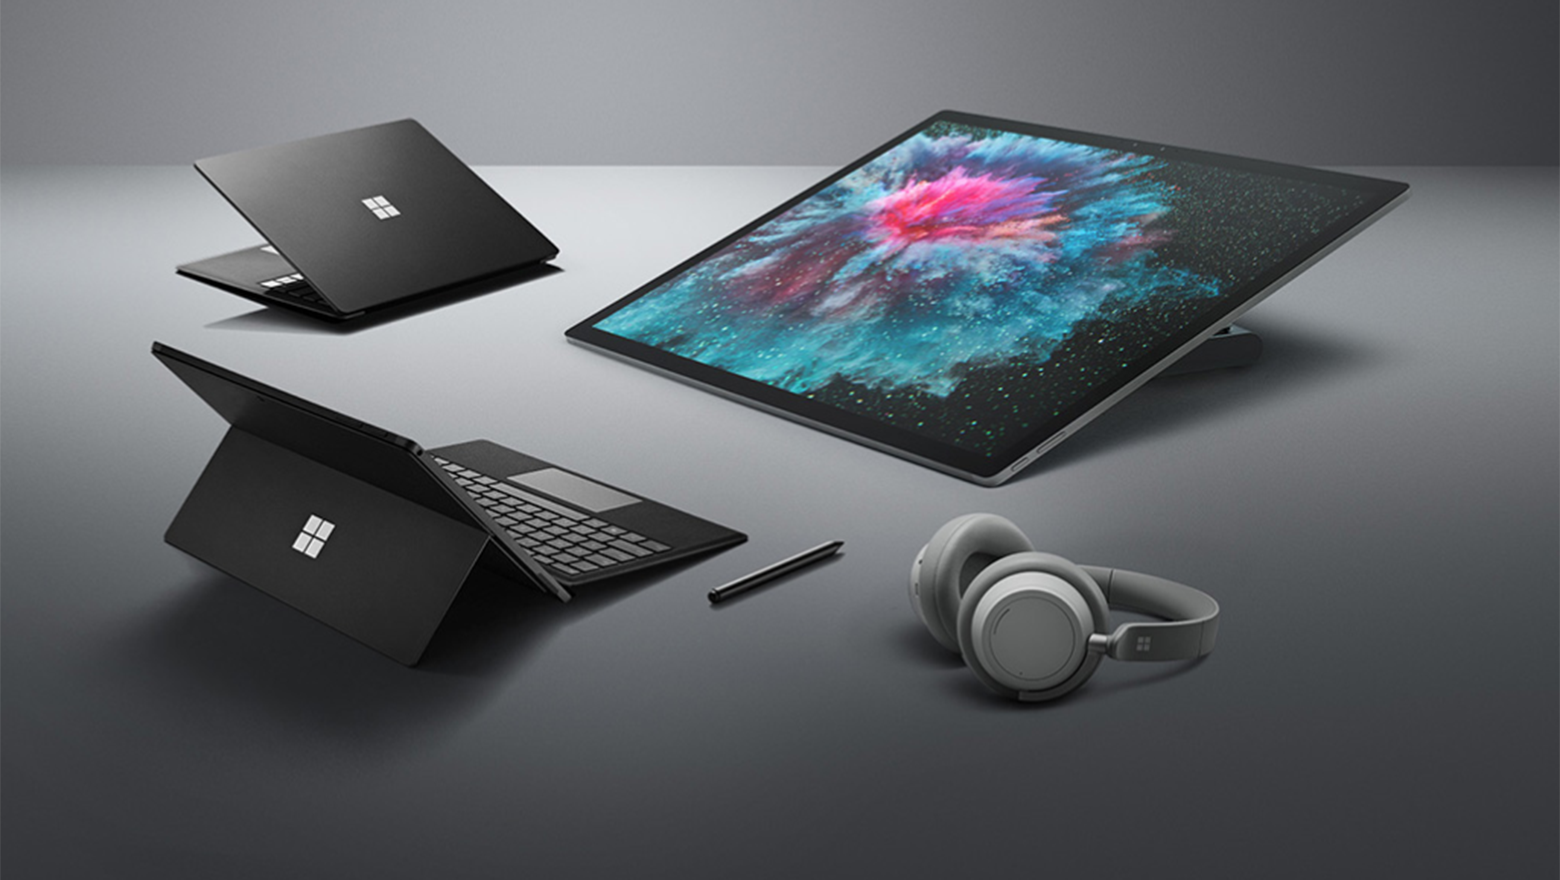 Surface family